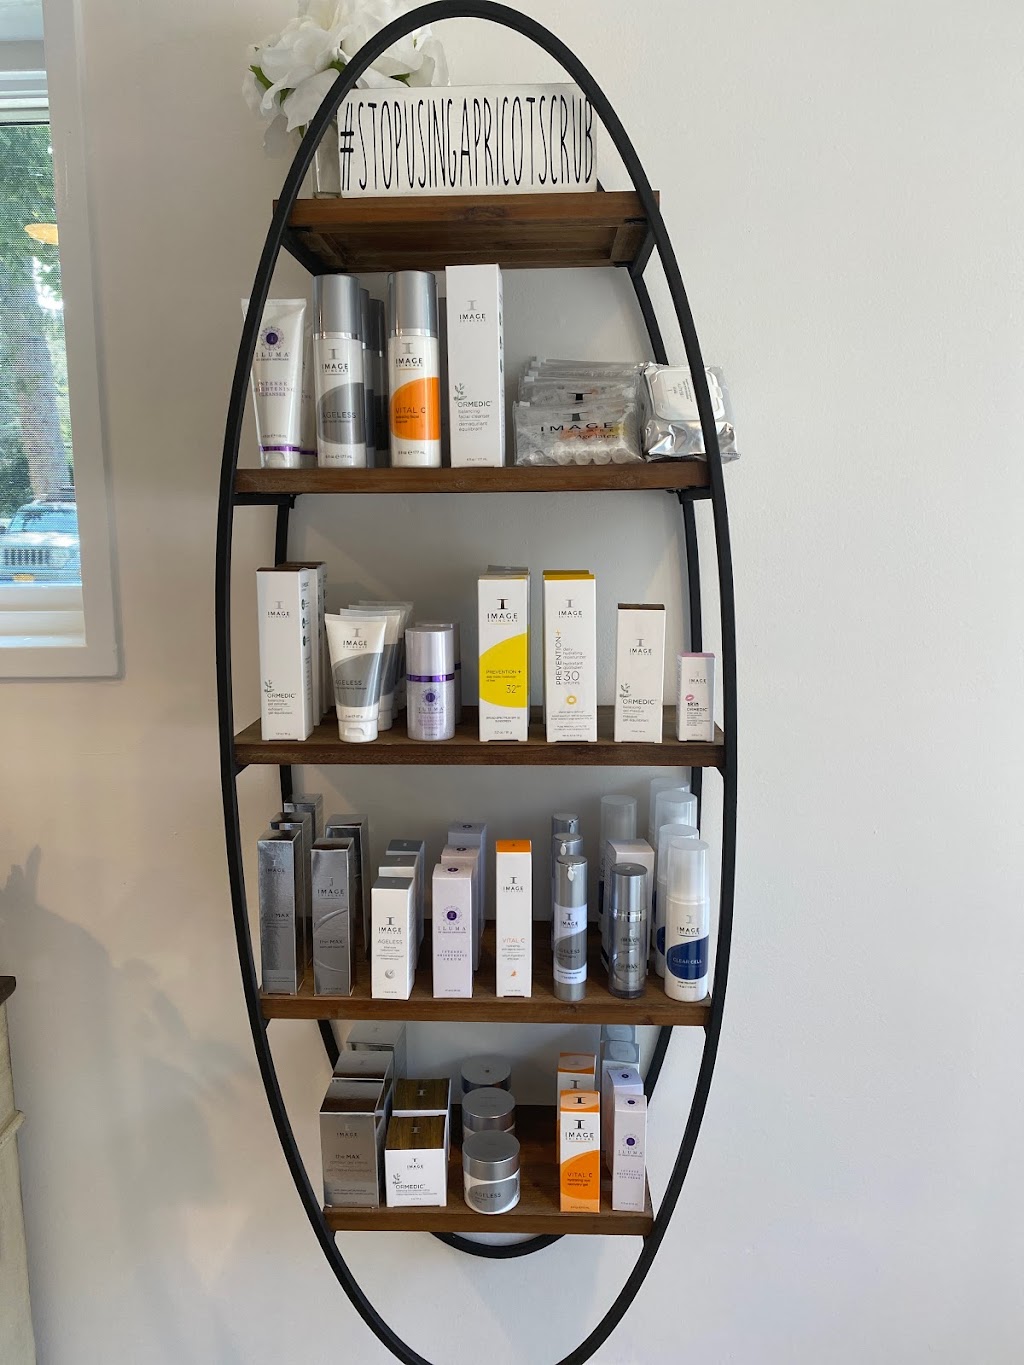 Polish & Glow Skin Care | 100 N Country Rd, Miller Place, NY 11764 | Phone: (631) 509-4434